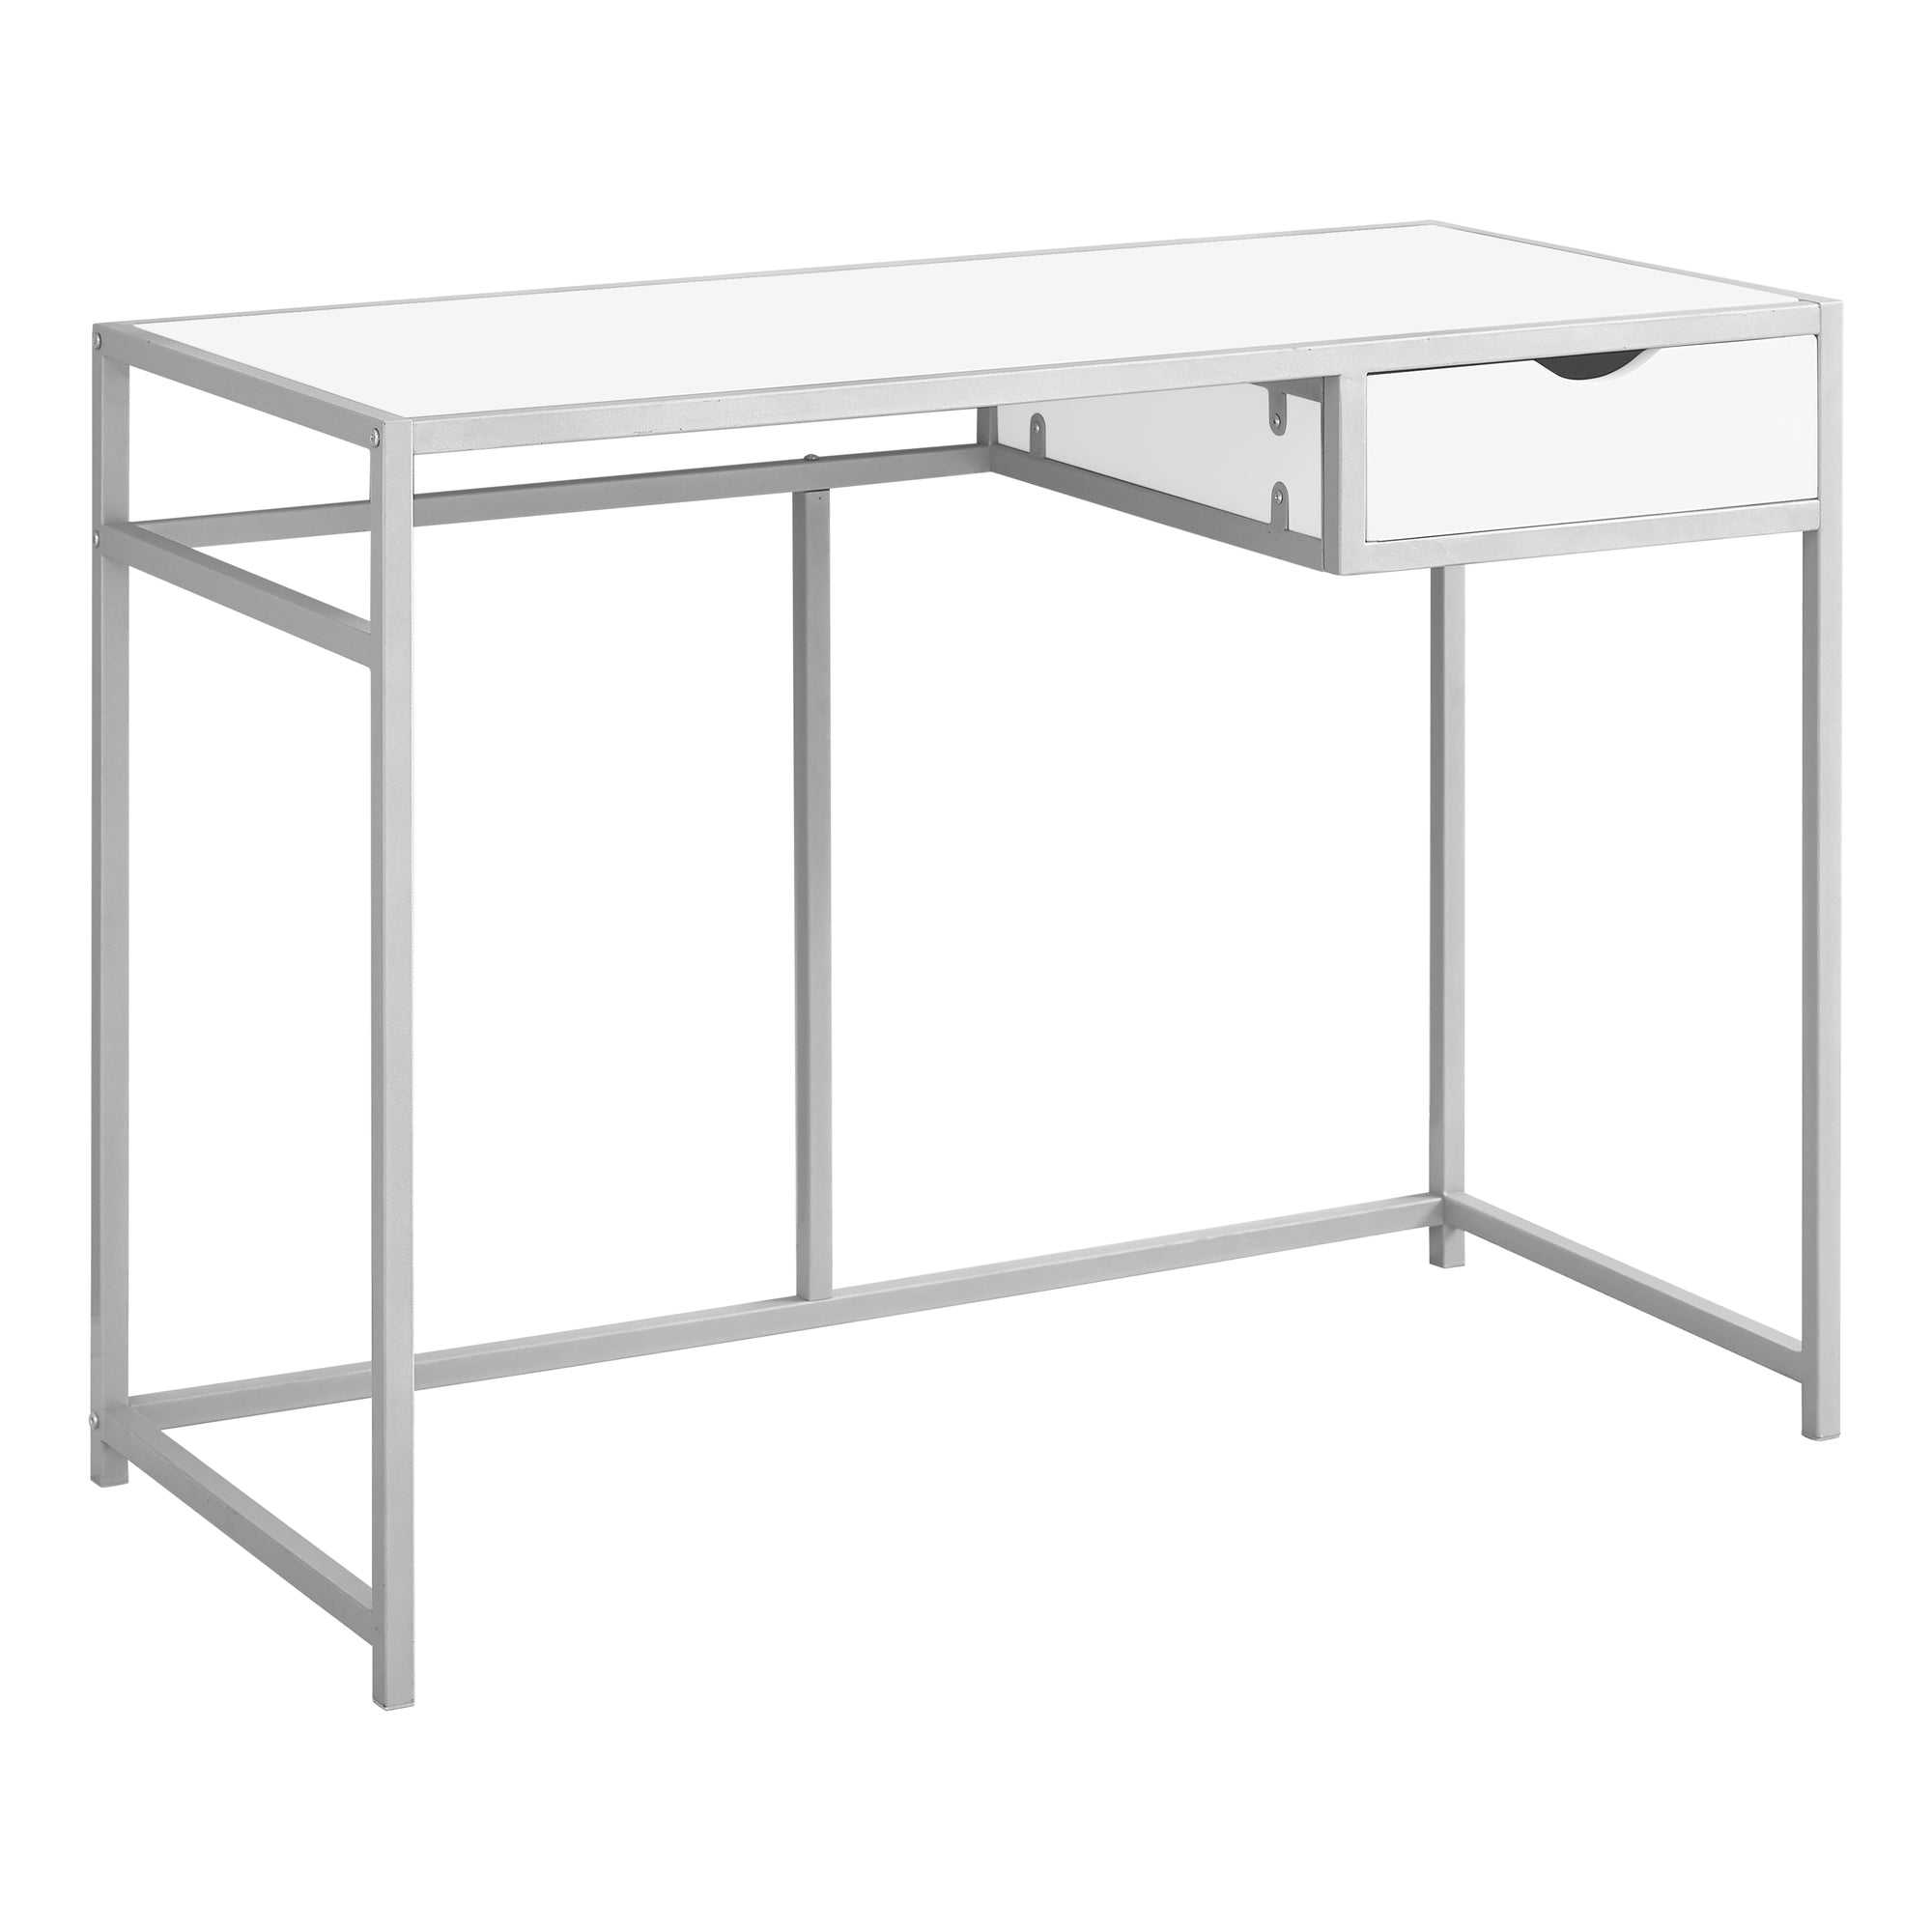 MN-537222    Computer Desk, Home Office, Laptop, Storage Drawers, 42"L, Metal, Laminate, White, Contemporary, Industrial, Modern